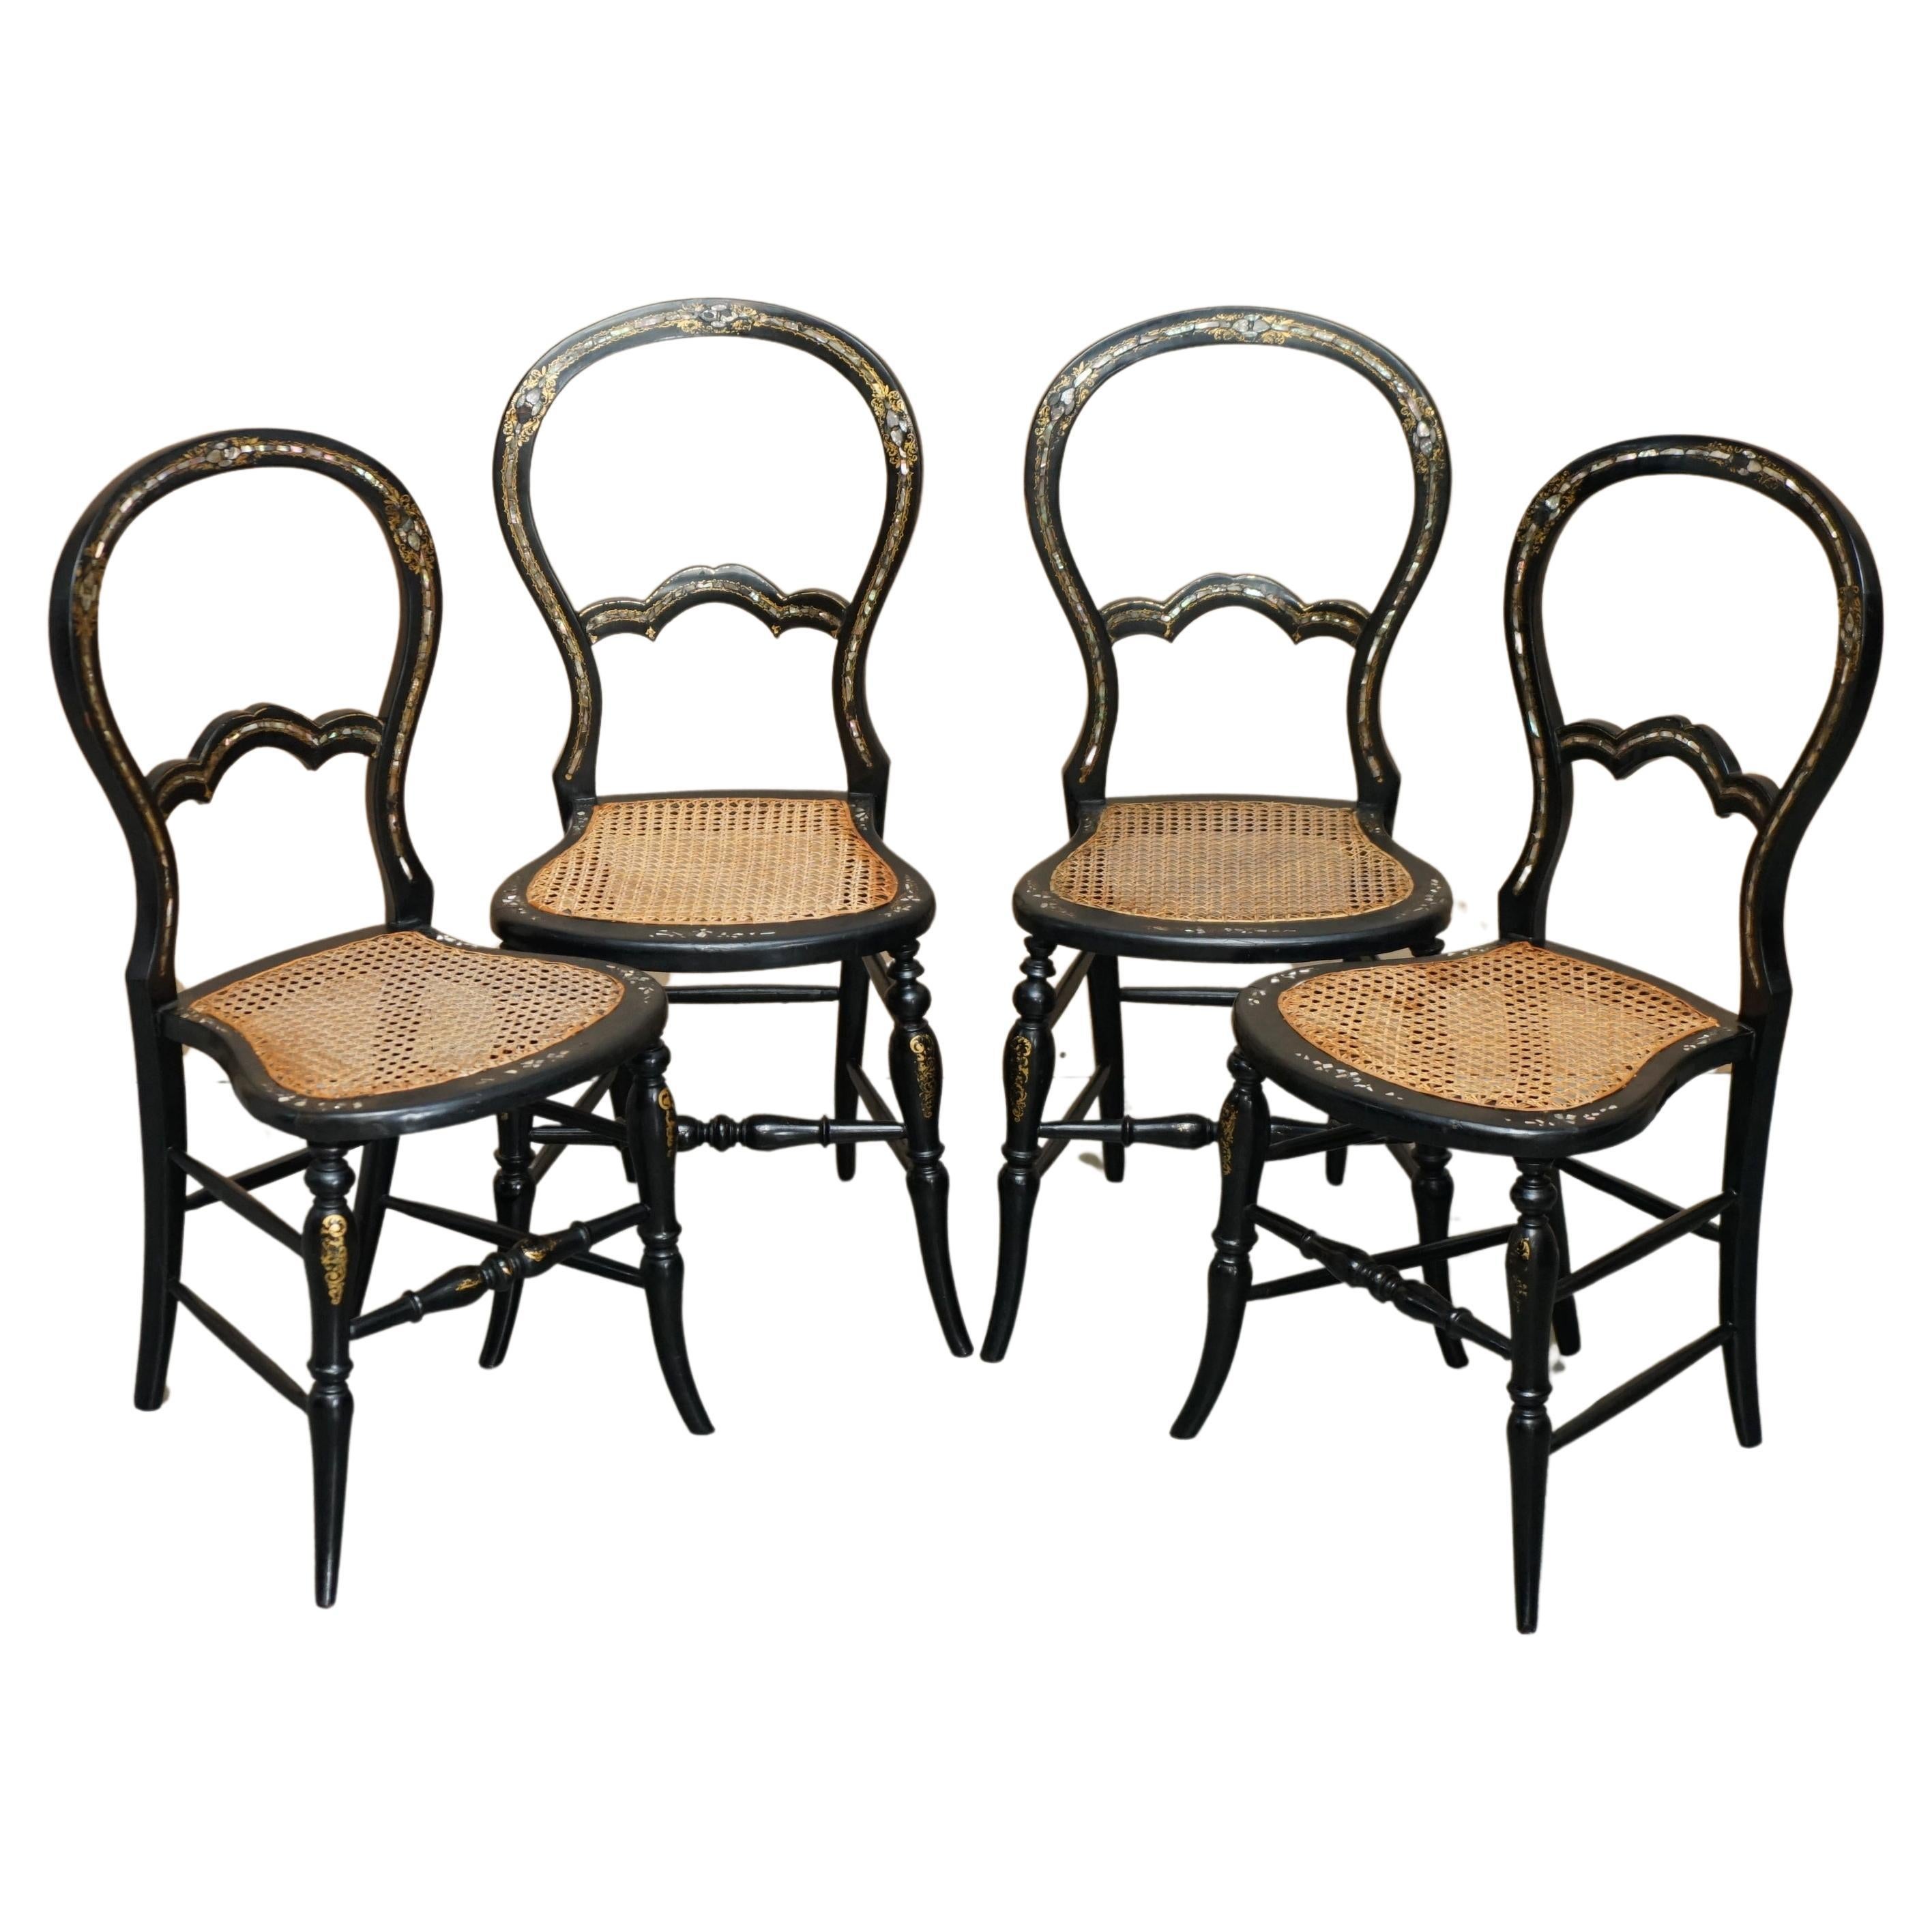 VIER FINE UND ANTIQUE REGENCY BERGERE MOTHER OF PEARL EBONISED SIDE CHAIRs